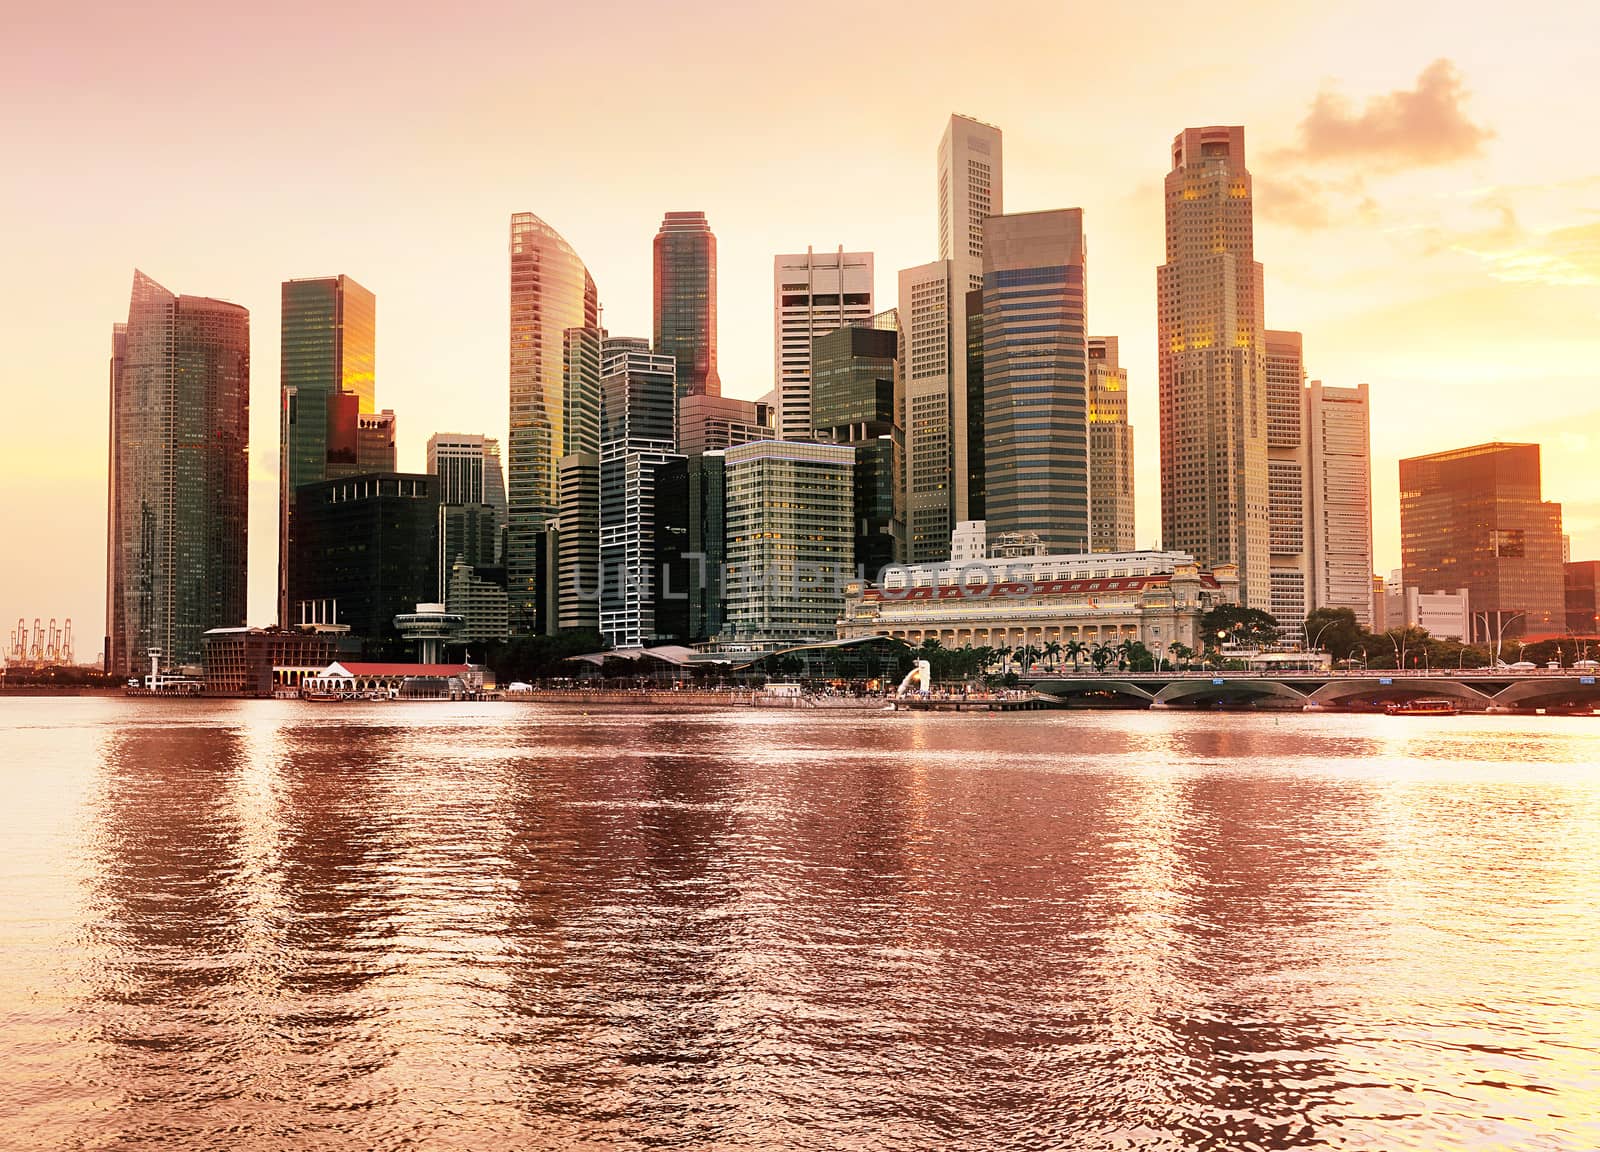 Skyline of Singapore downtown at a beautiful sunset 